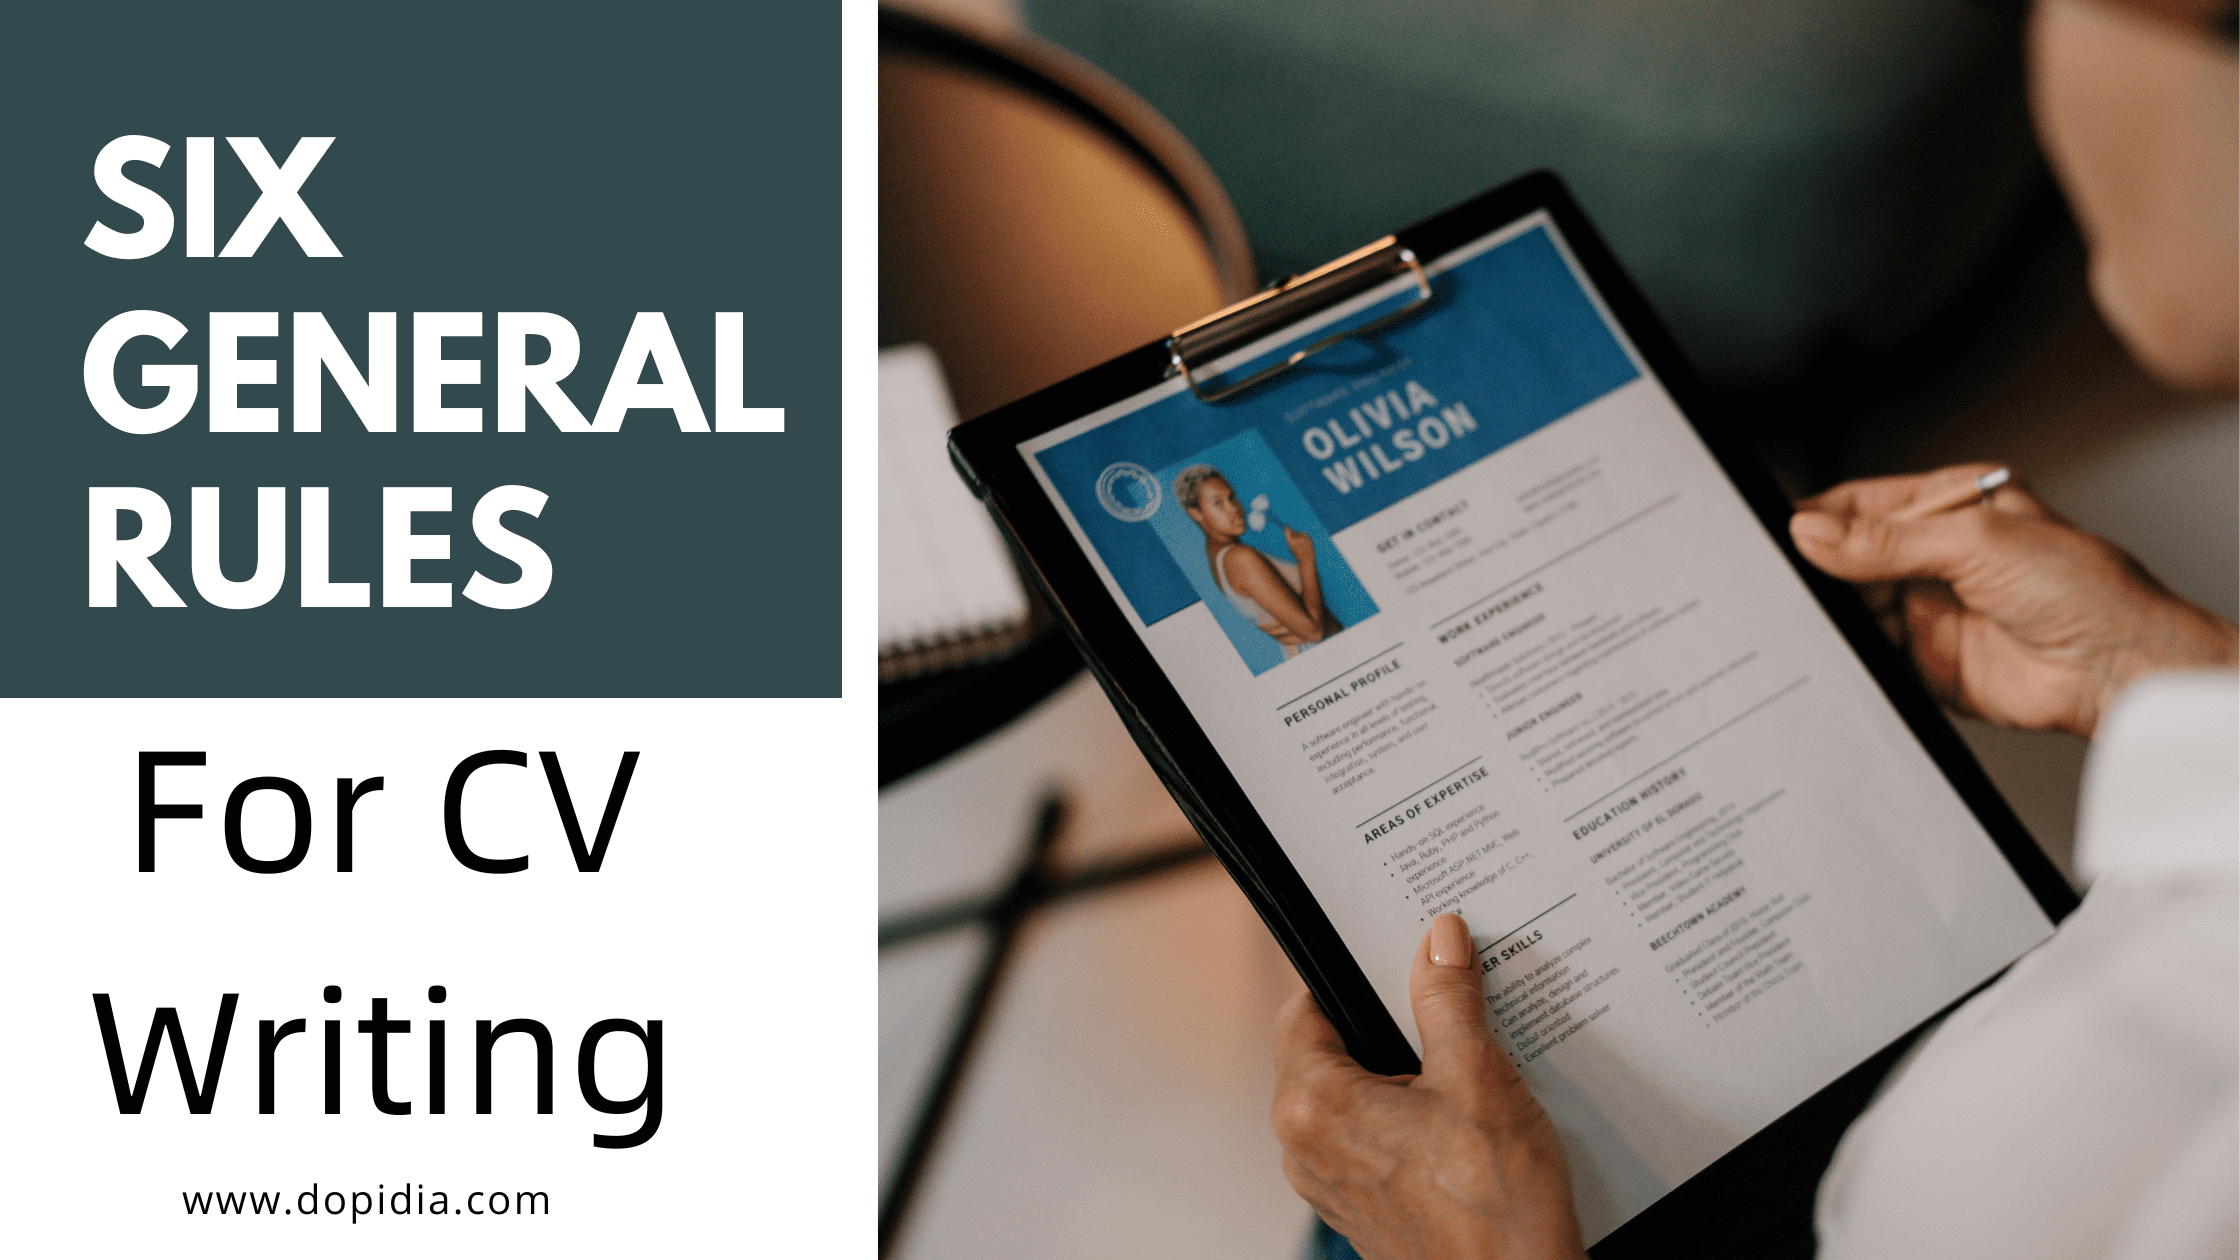 6 general rules for CV writing